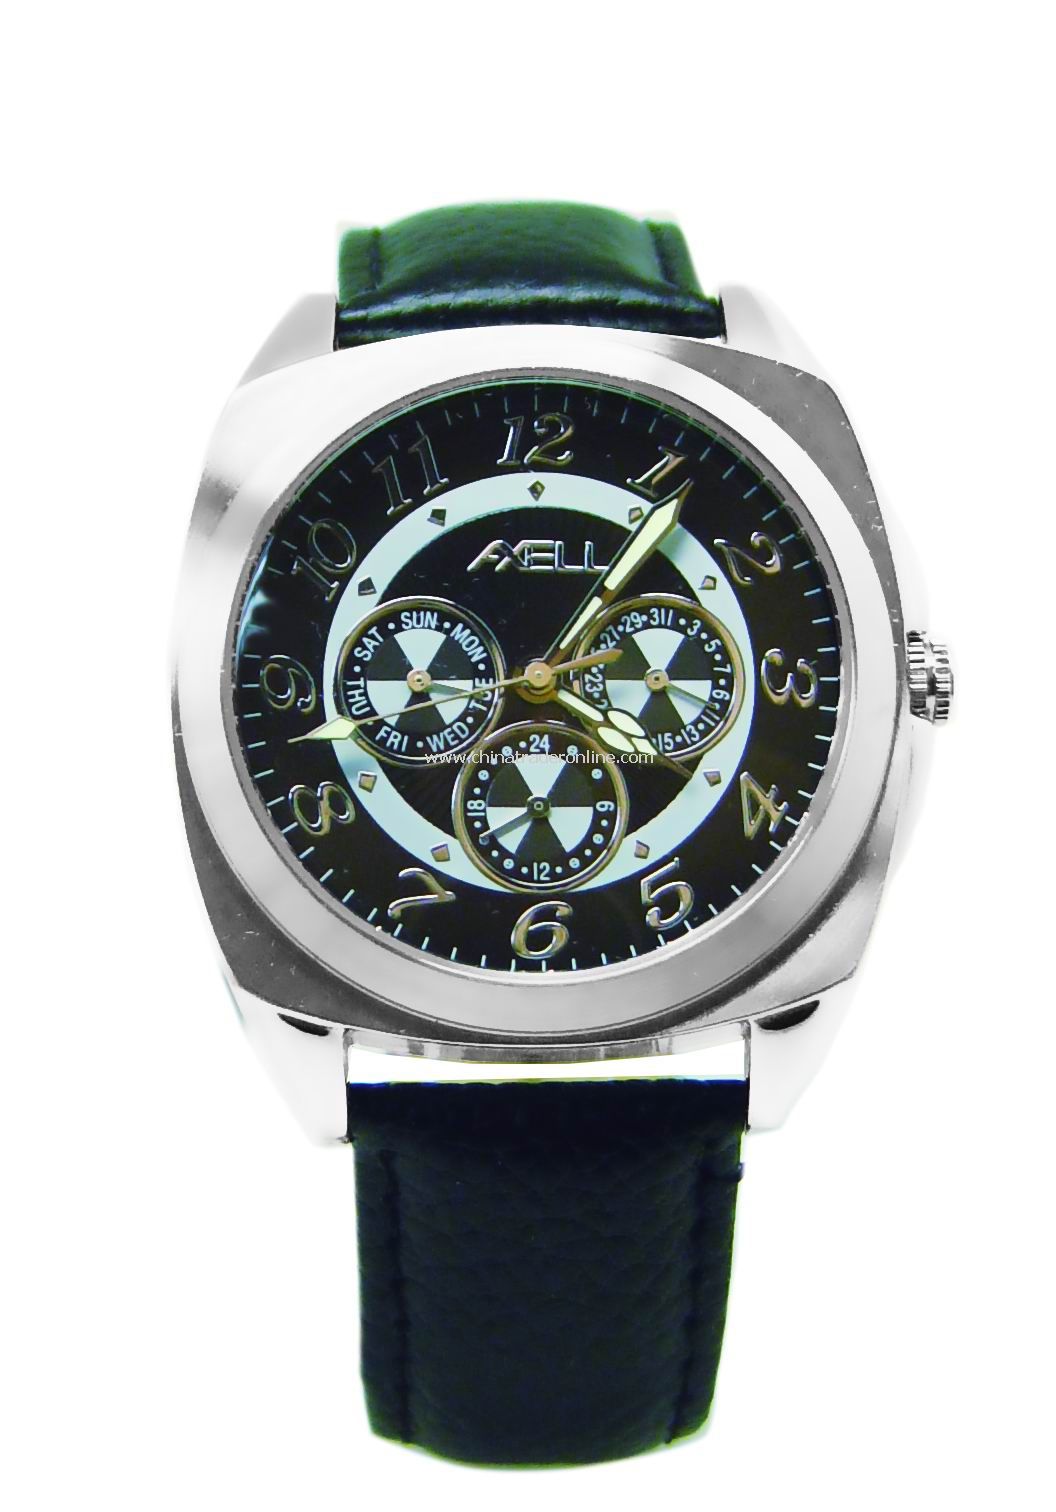 MENS GIFT WATCH from China